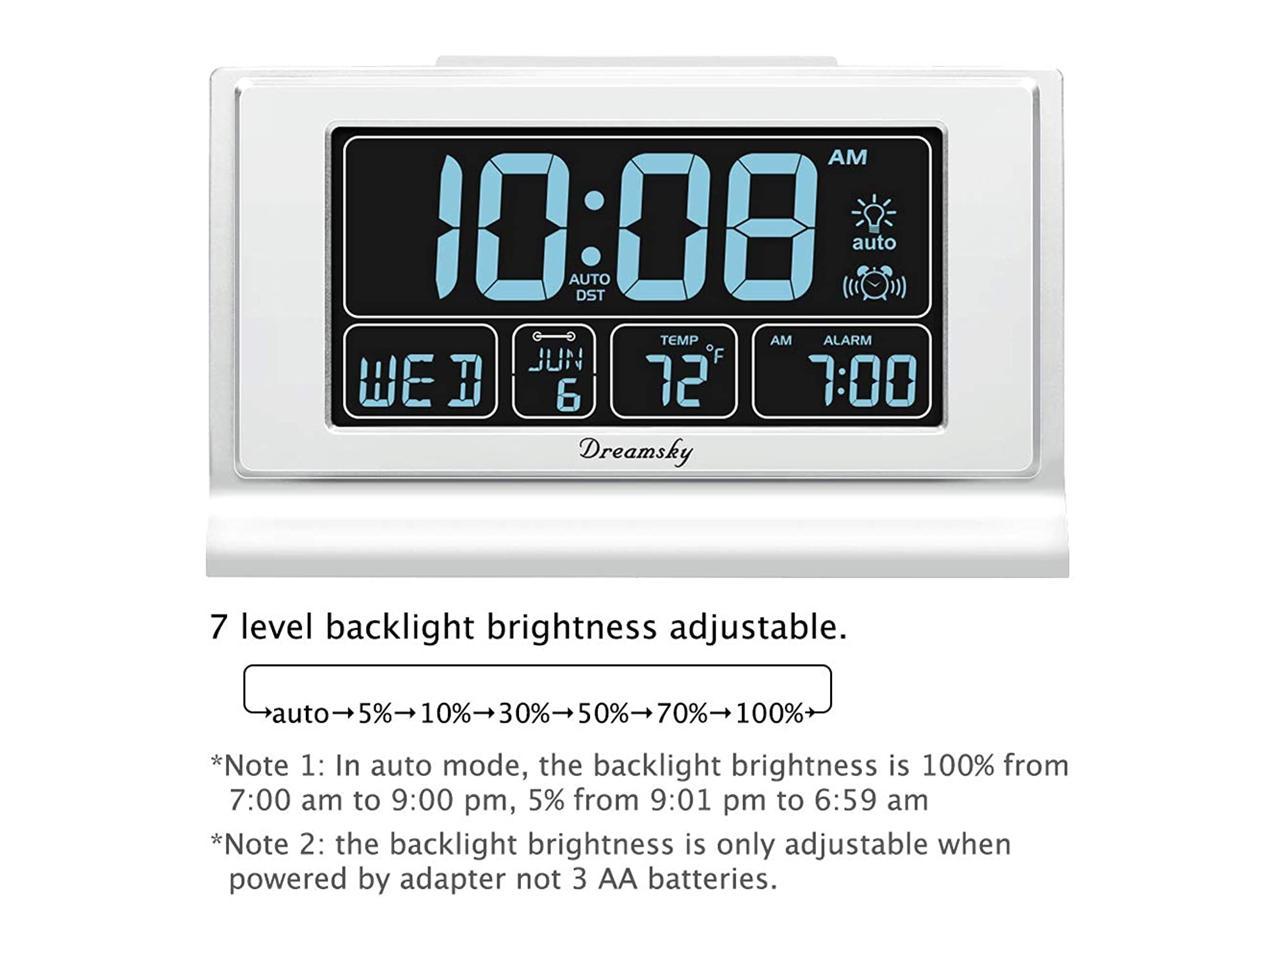 Snooze. Auto DST Setting Gray DreamSky Auto Set Digital Alarm Clock with USB Charging Port 6.6 Inches Large Screen with Time/Date/Temperature Display Full Range Brightness Dimmer